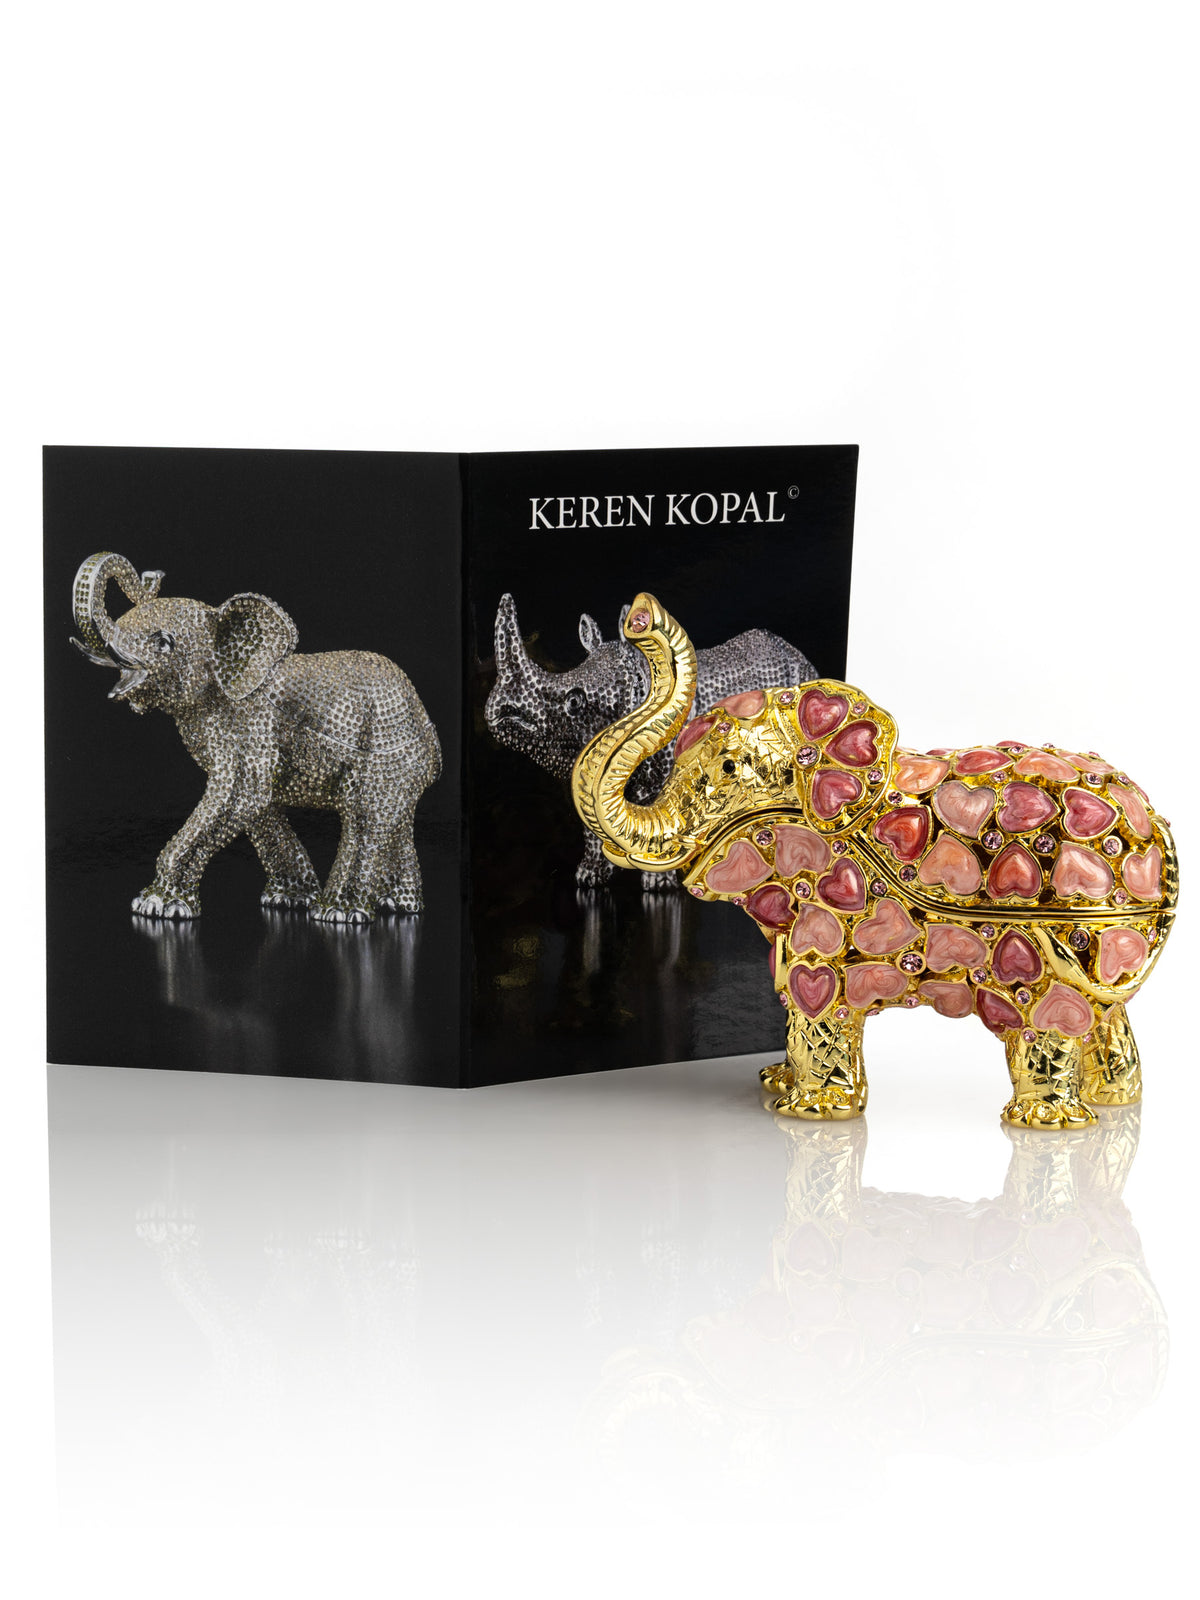 Golden Elephant with Hearts